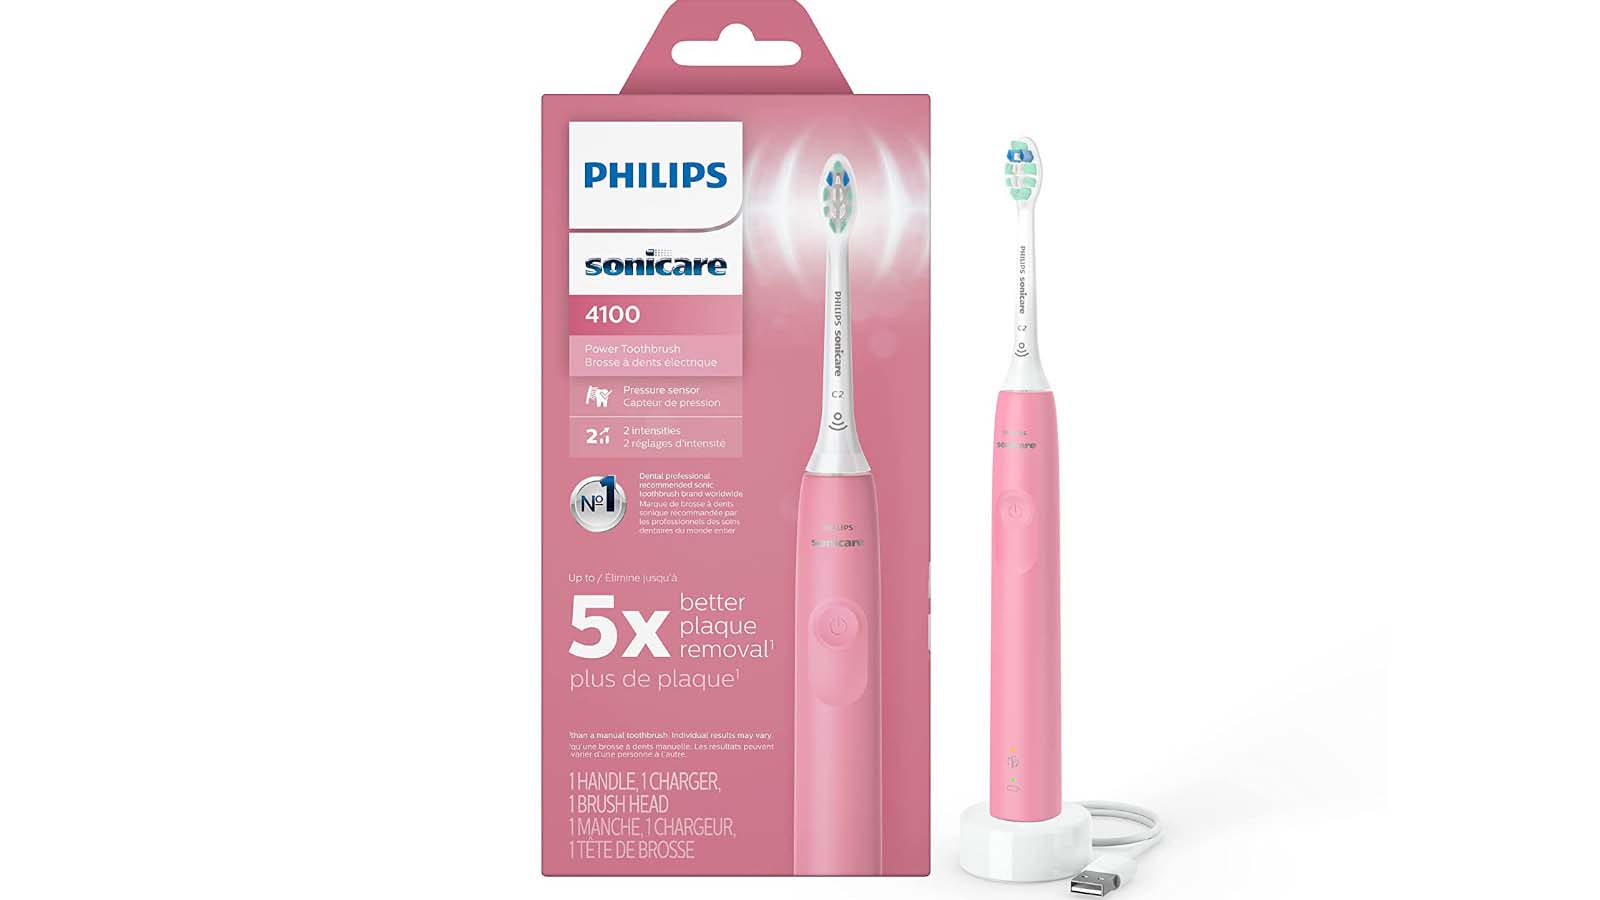 Review of Philips Sonicare 4100 - Philips Sonicare ProtectiveClean 4100 (Deep Pink, HX3681/26) toothbrush and its packaging